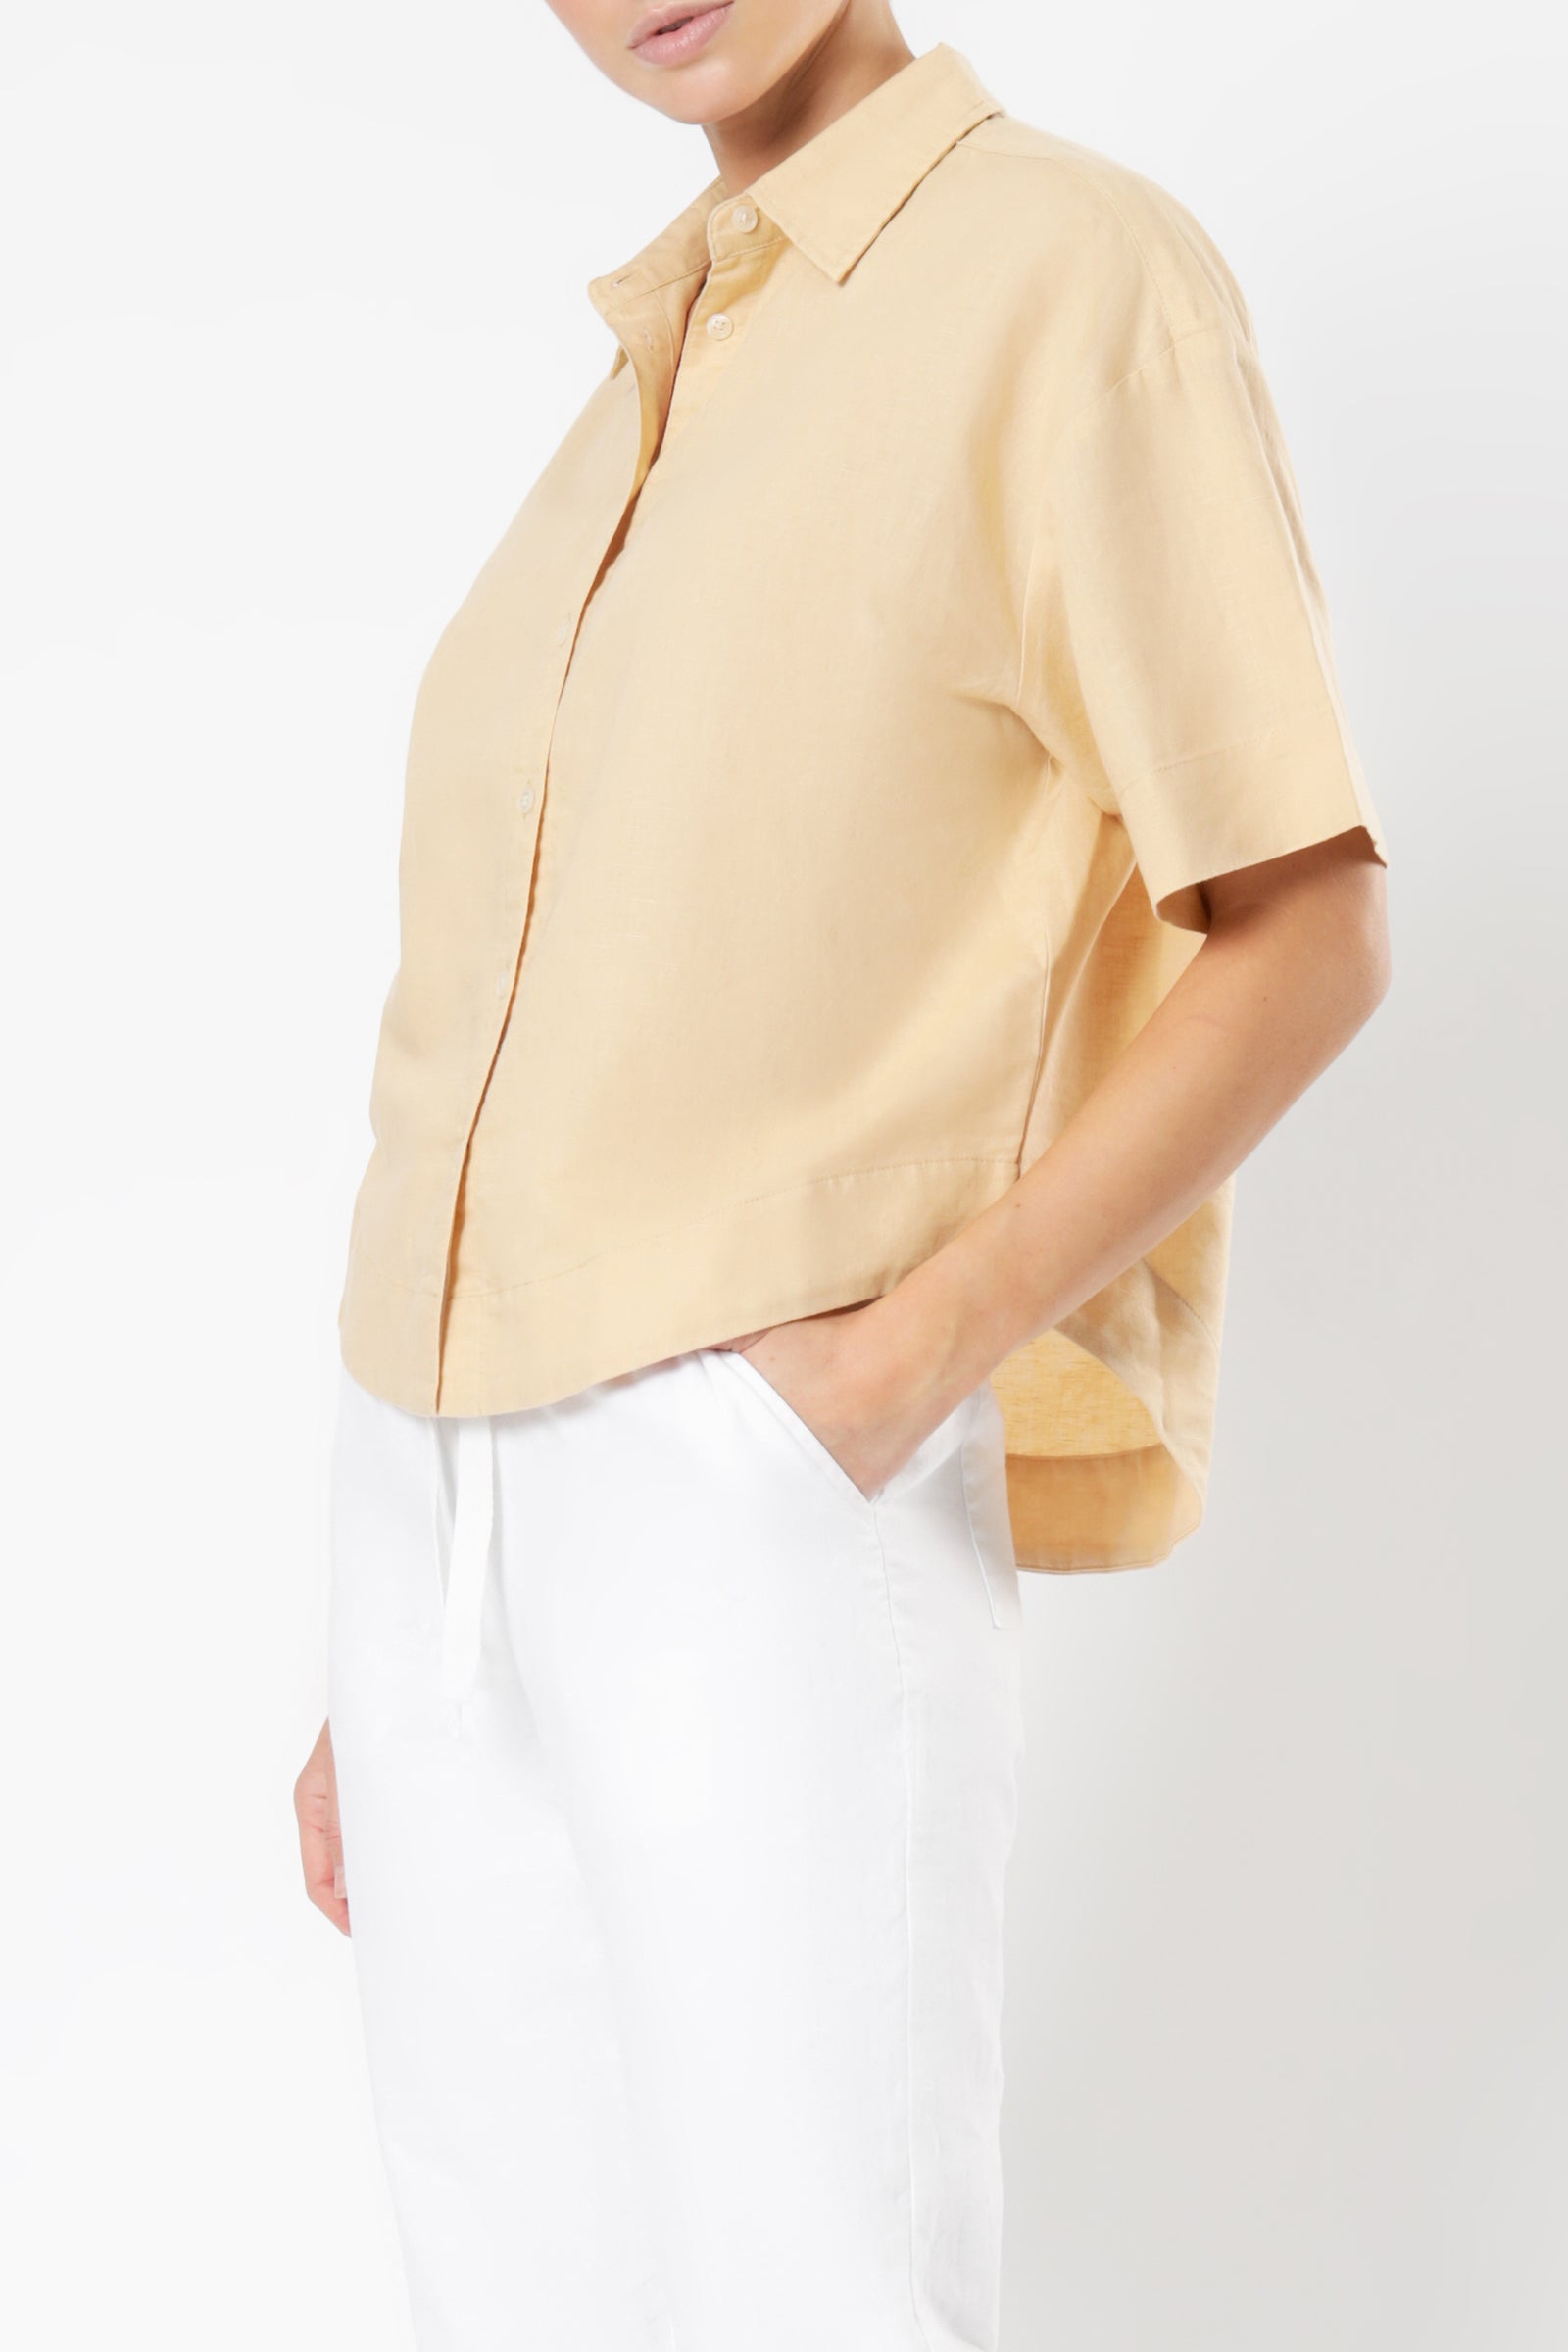 Nude Lucy Clement Linen Shirt Apricot Tees 